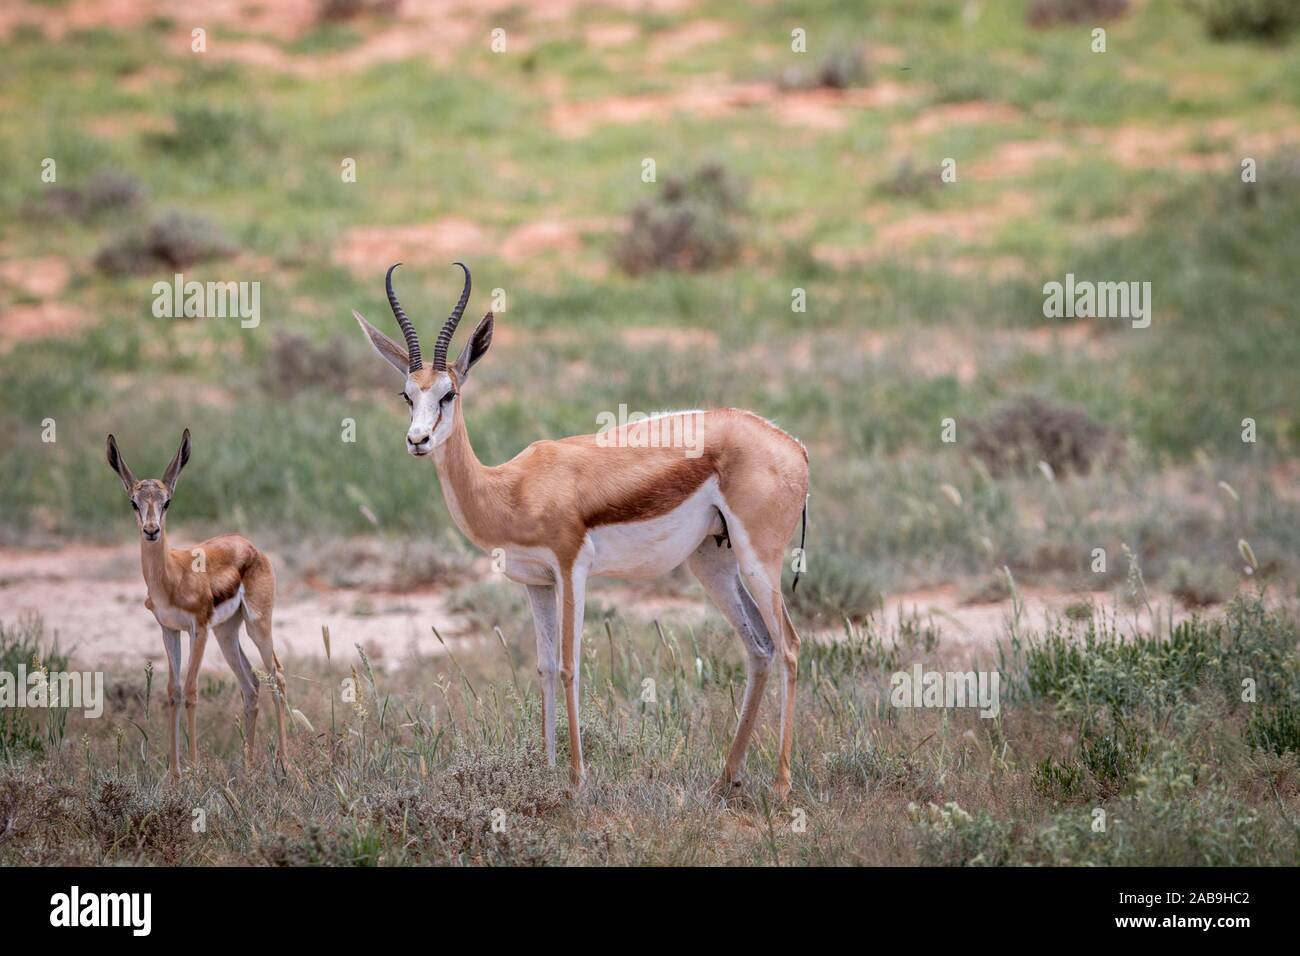 Starring Springbok in the Kgalagadi Transfrontier Park, South Africa. Stock Photo